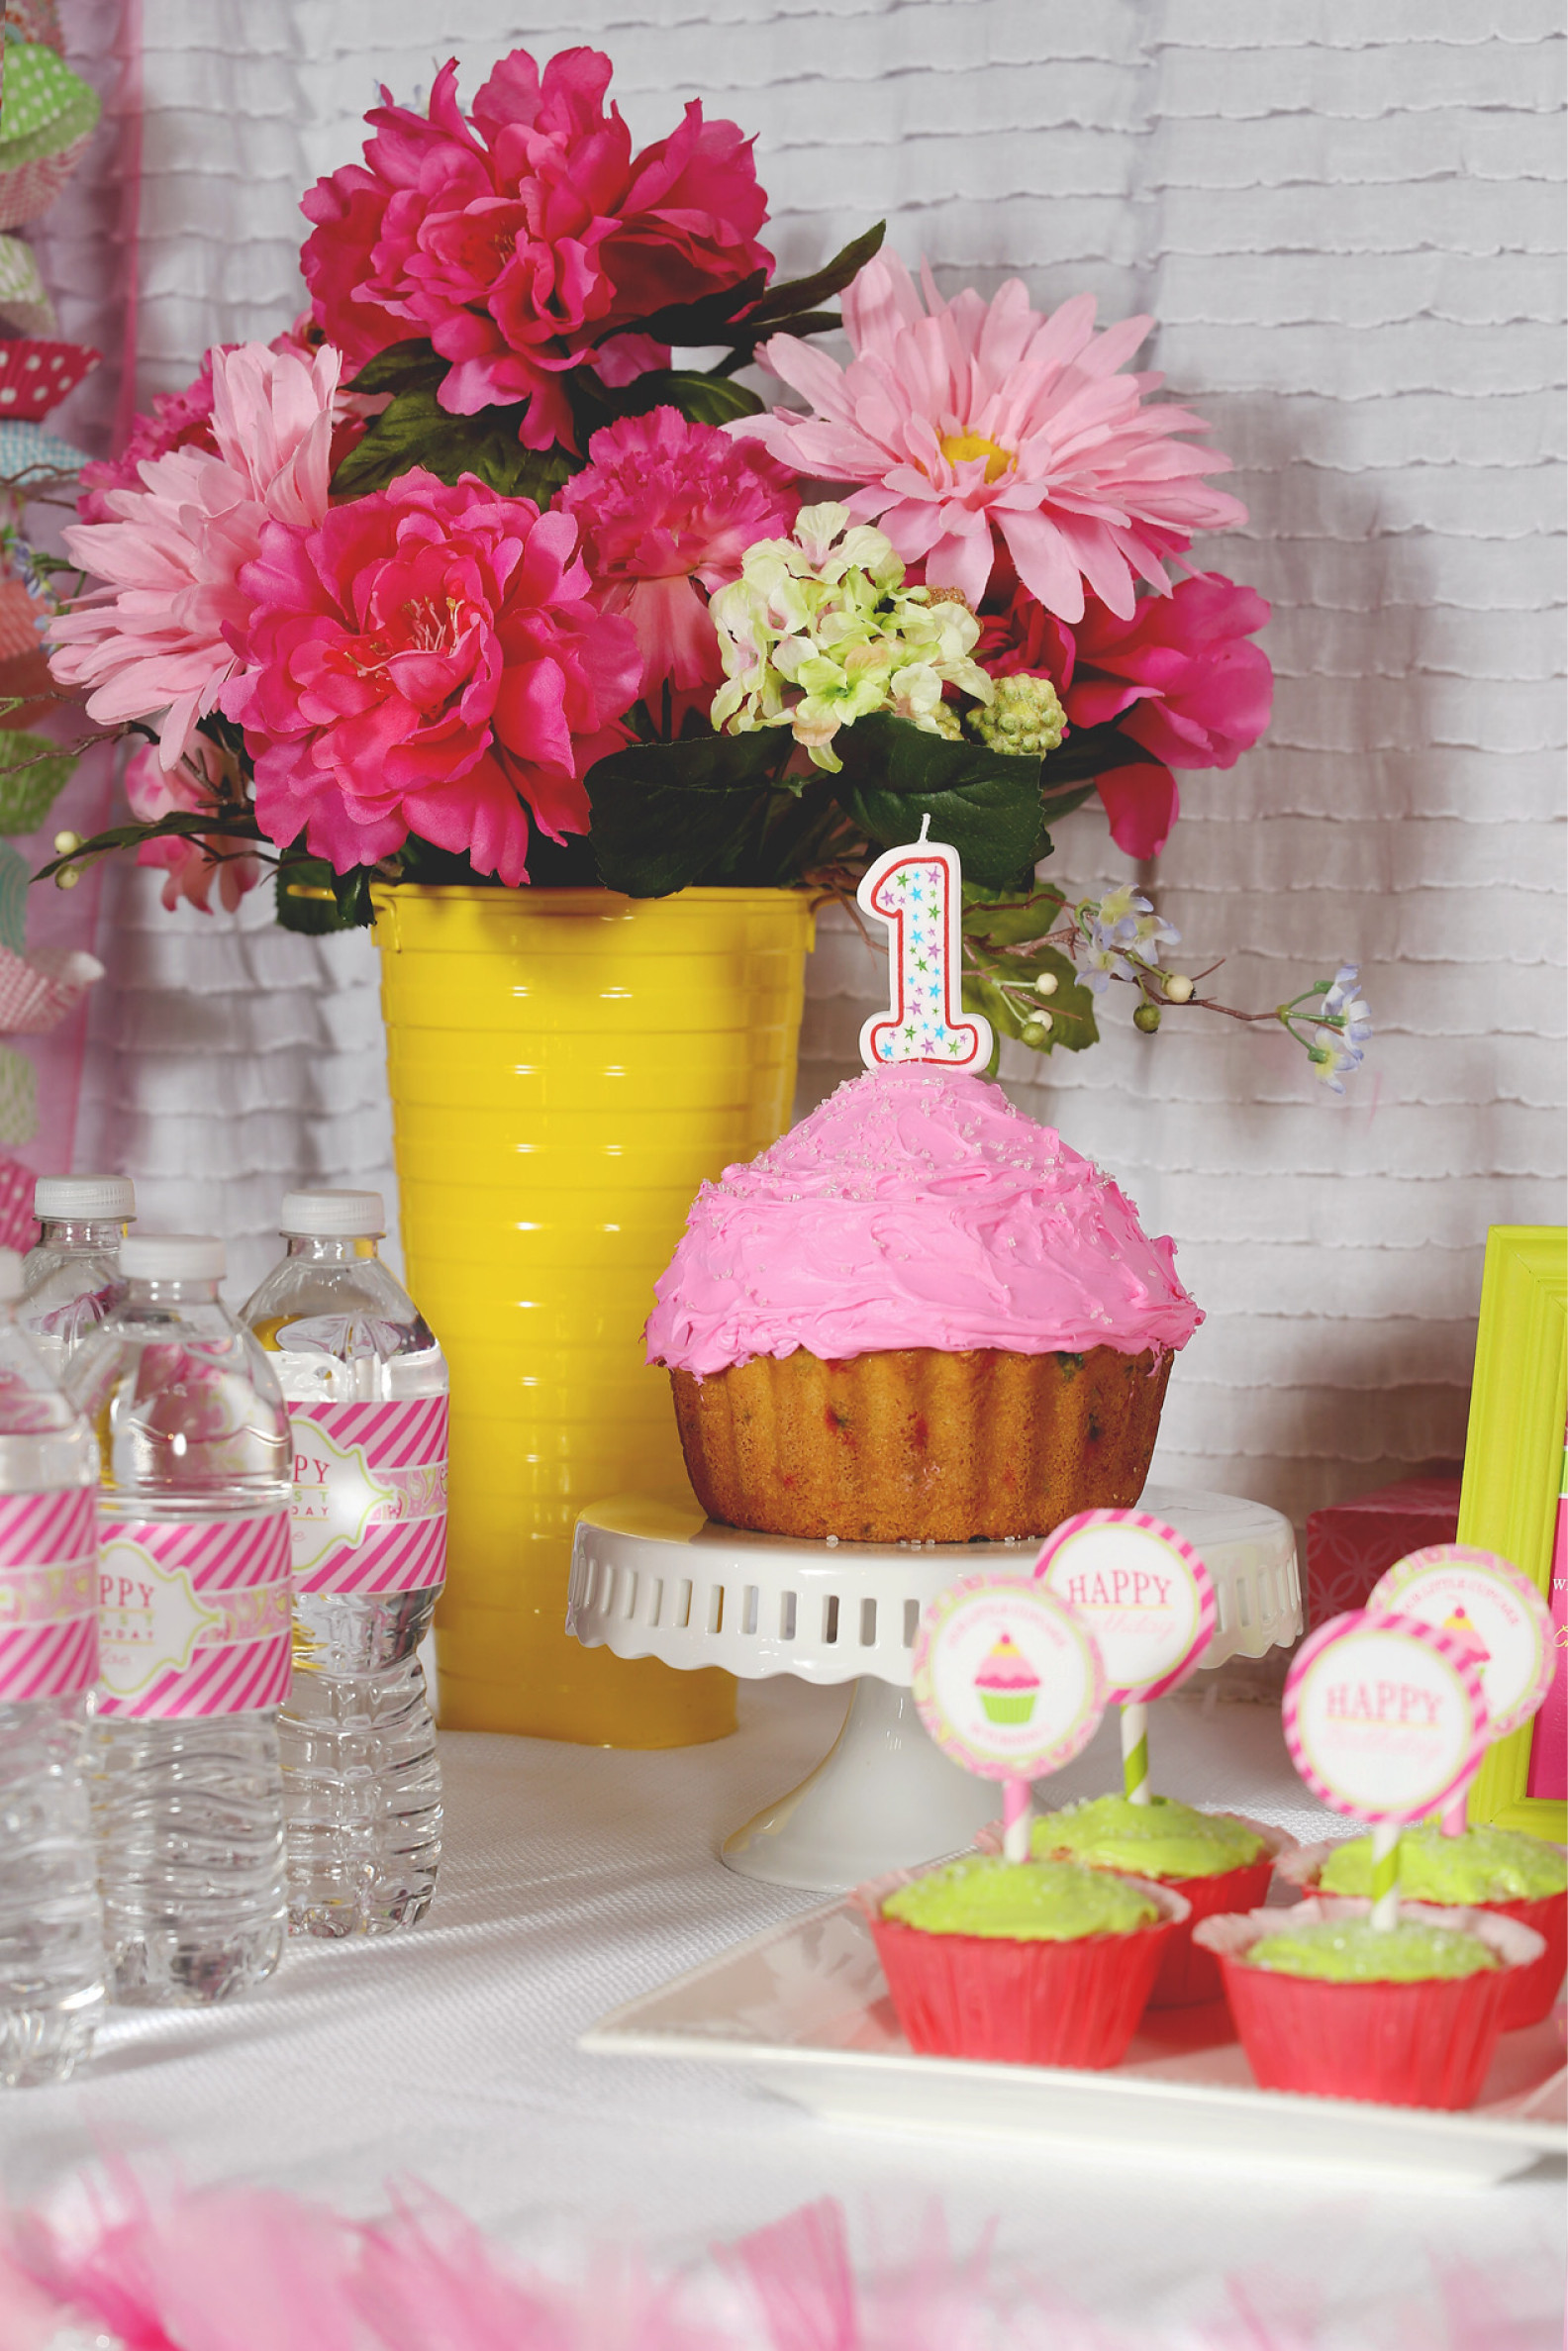 Birthday Cupcake Ideas
 A Cupcake Themed 1st Birthday party with Paisley and Polka